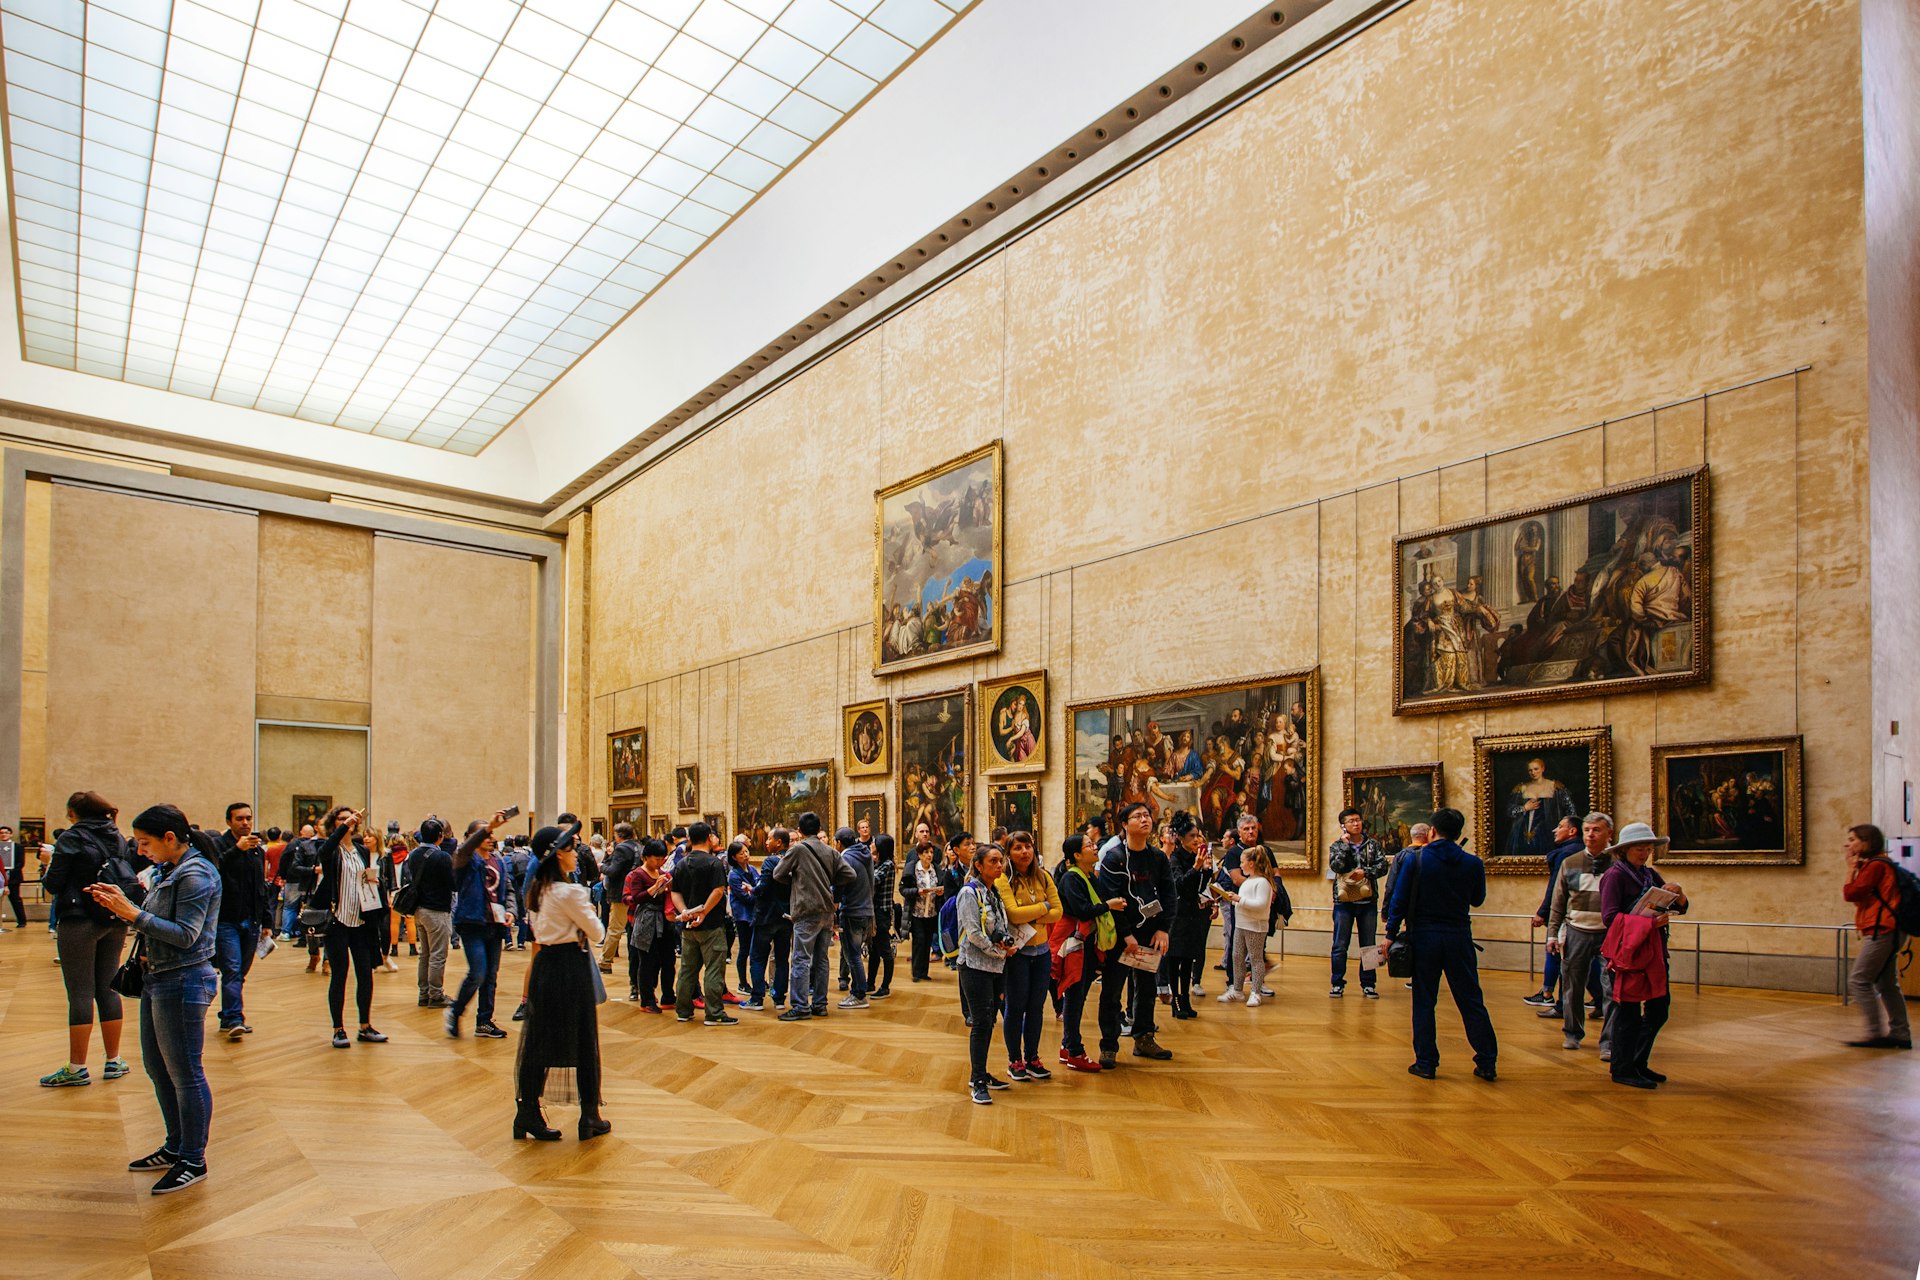 Tourists visit art gallery in the Louvre Museum.